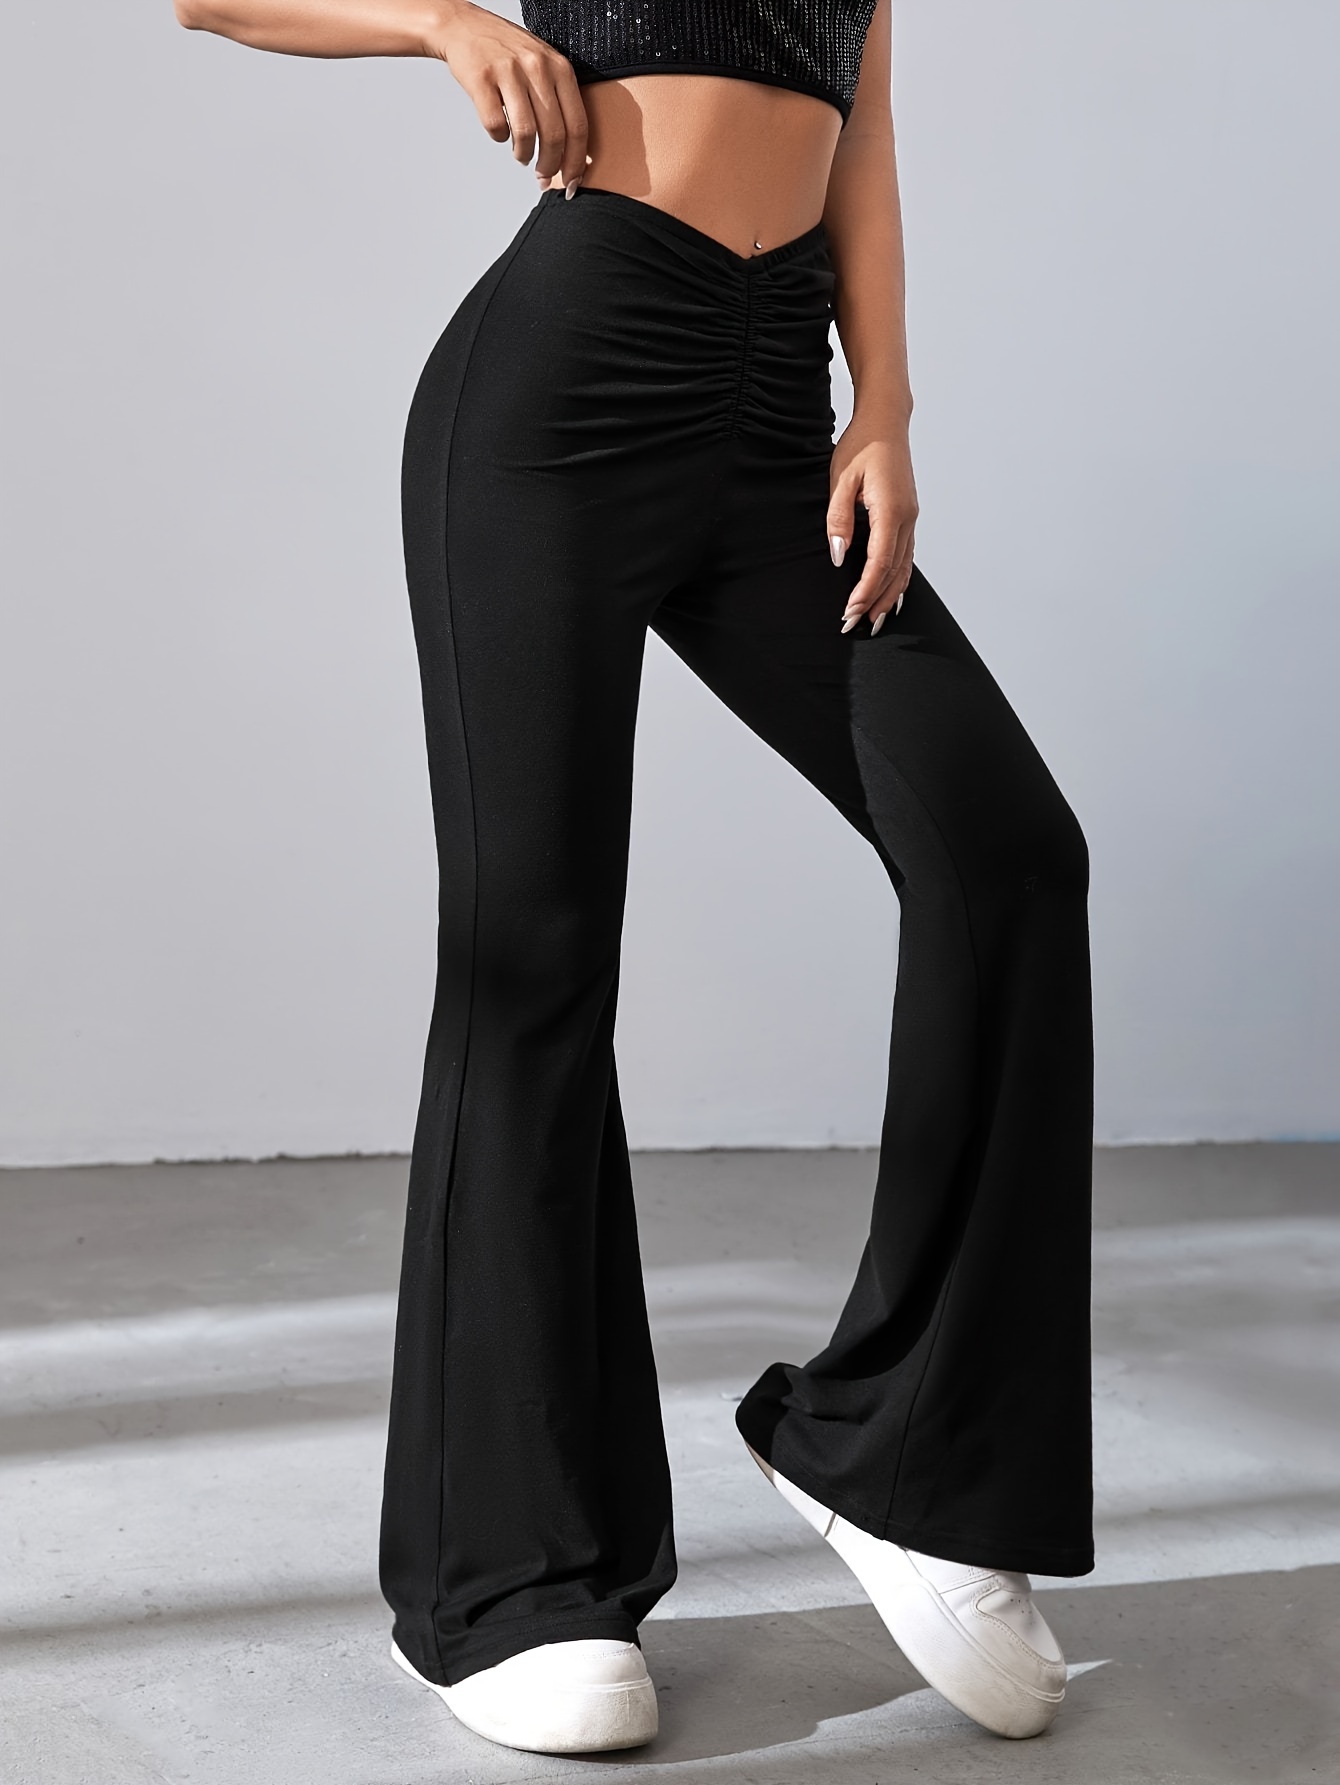 Ruched Flare Leg Trousers  Flare leg pants, Pants for women